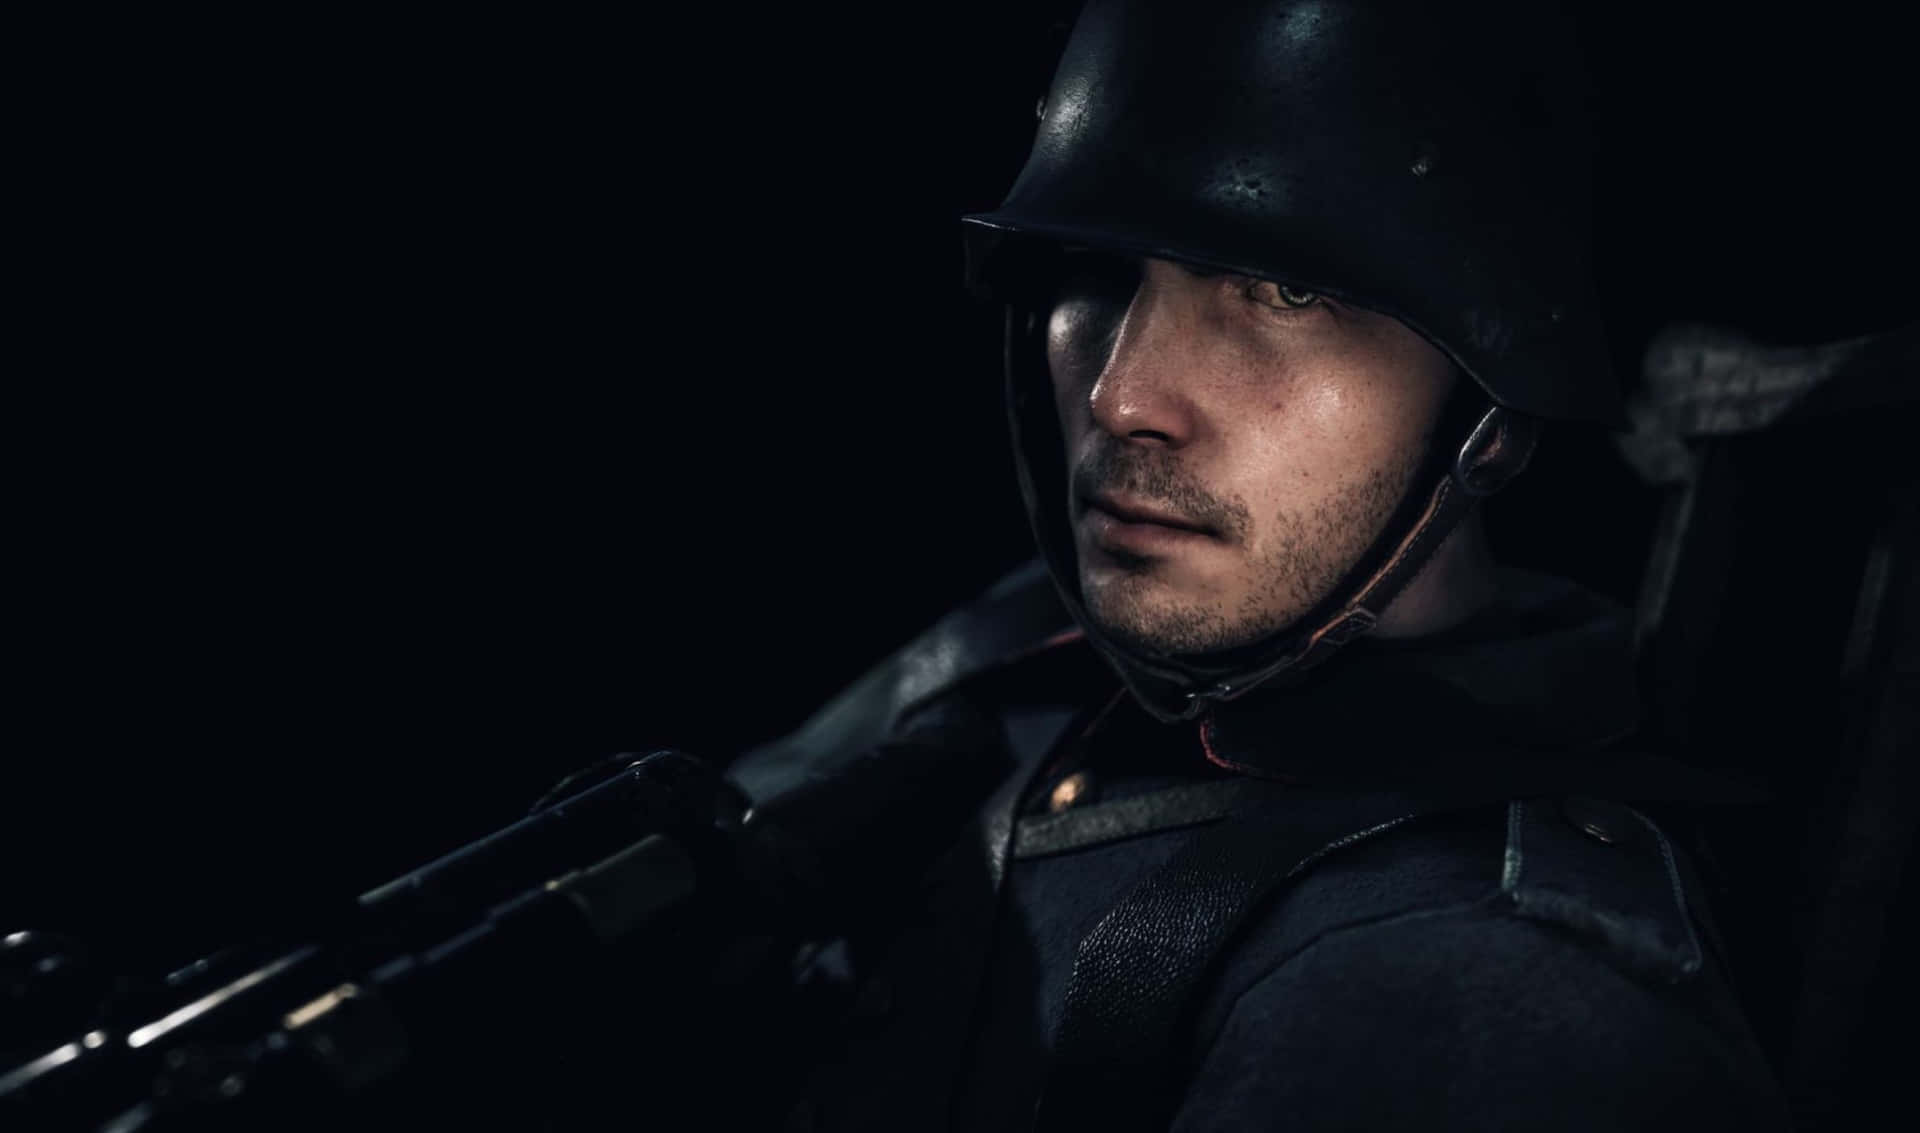 A Soldier In A Helmet Is Holding A Gun